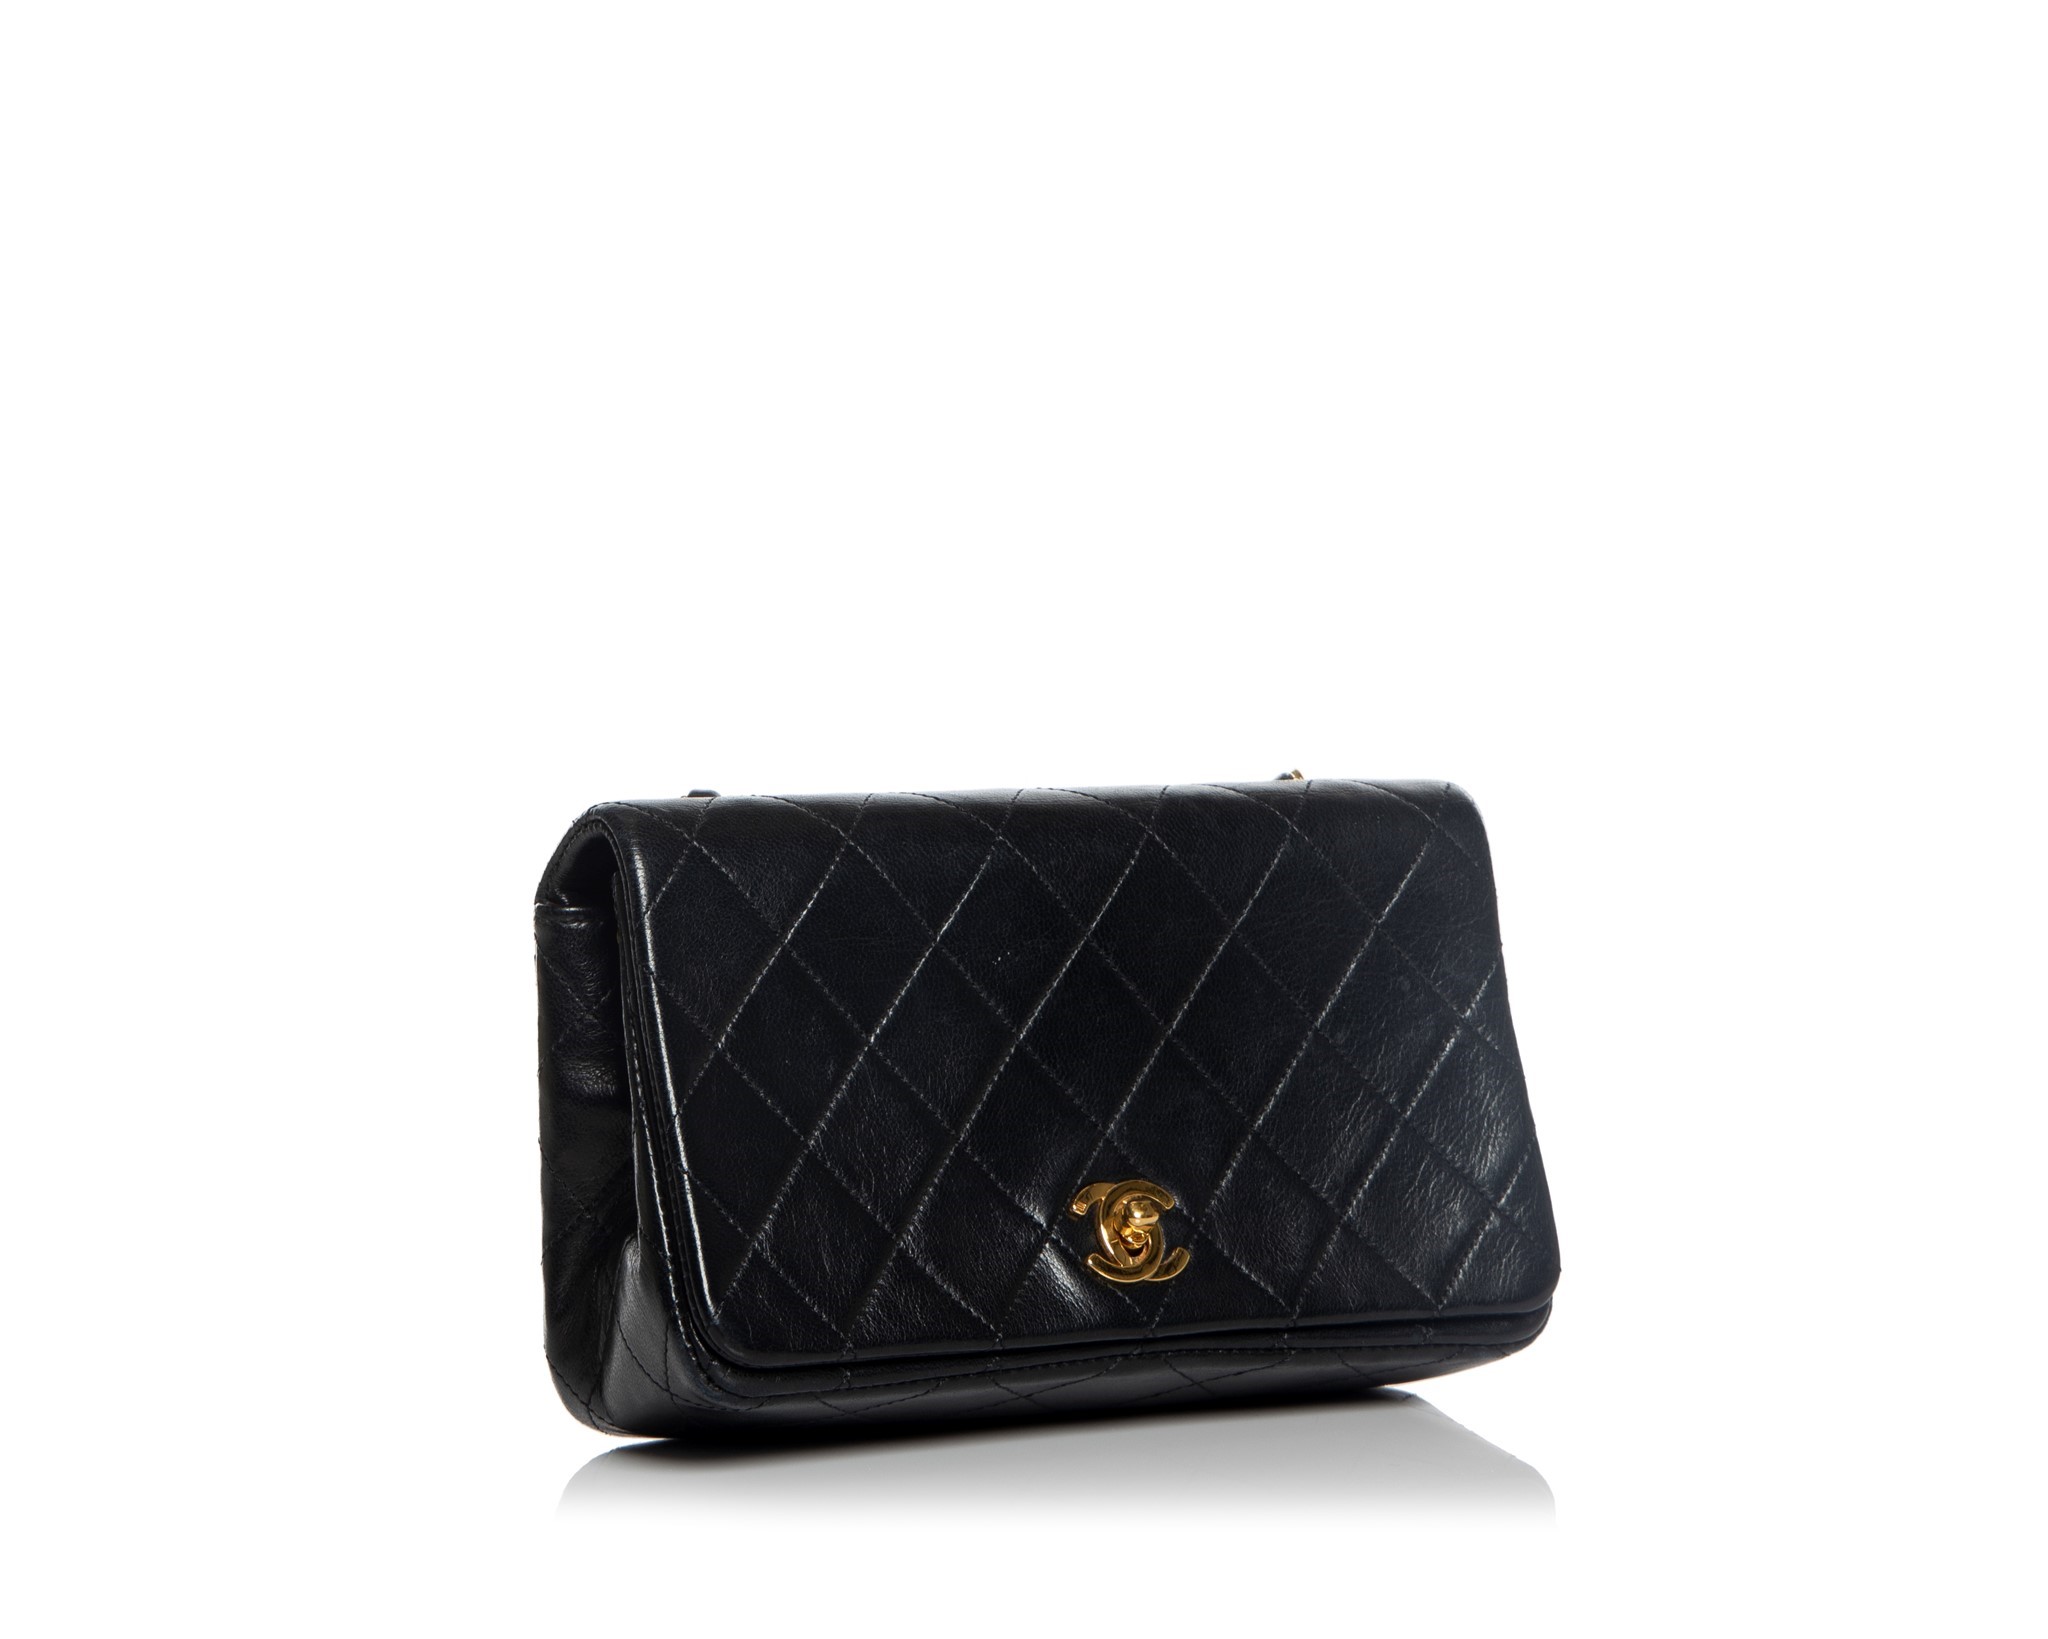 Nass boutique is a multi-brand boutique curating women's clothing and  accessoriesVINTAGE CHANEL MINI QUILTED SHOULDER BAG